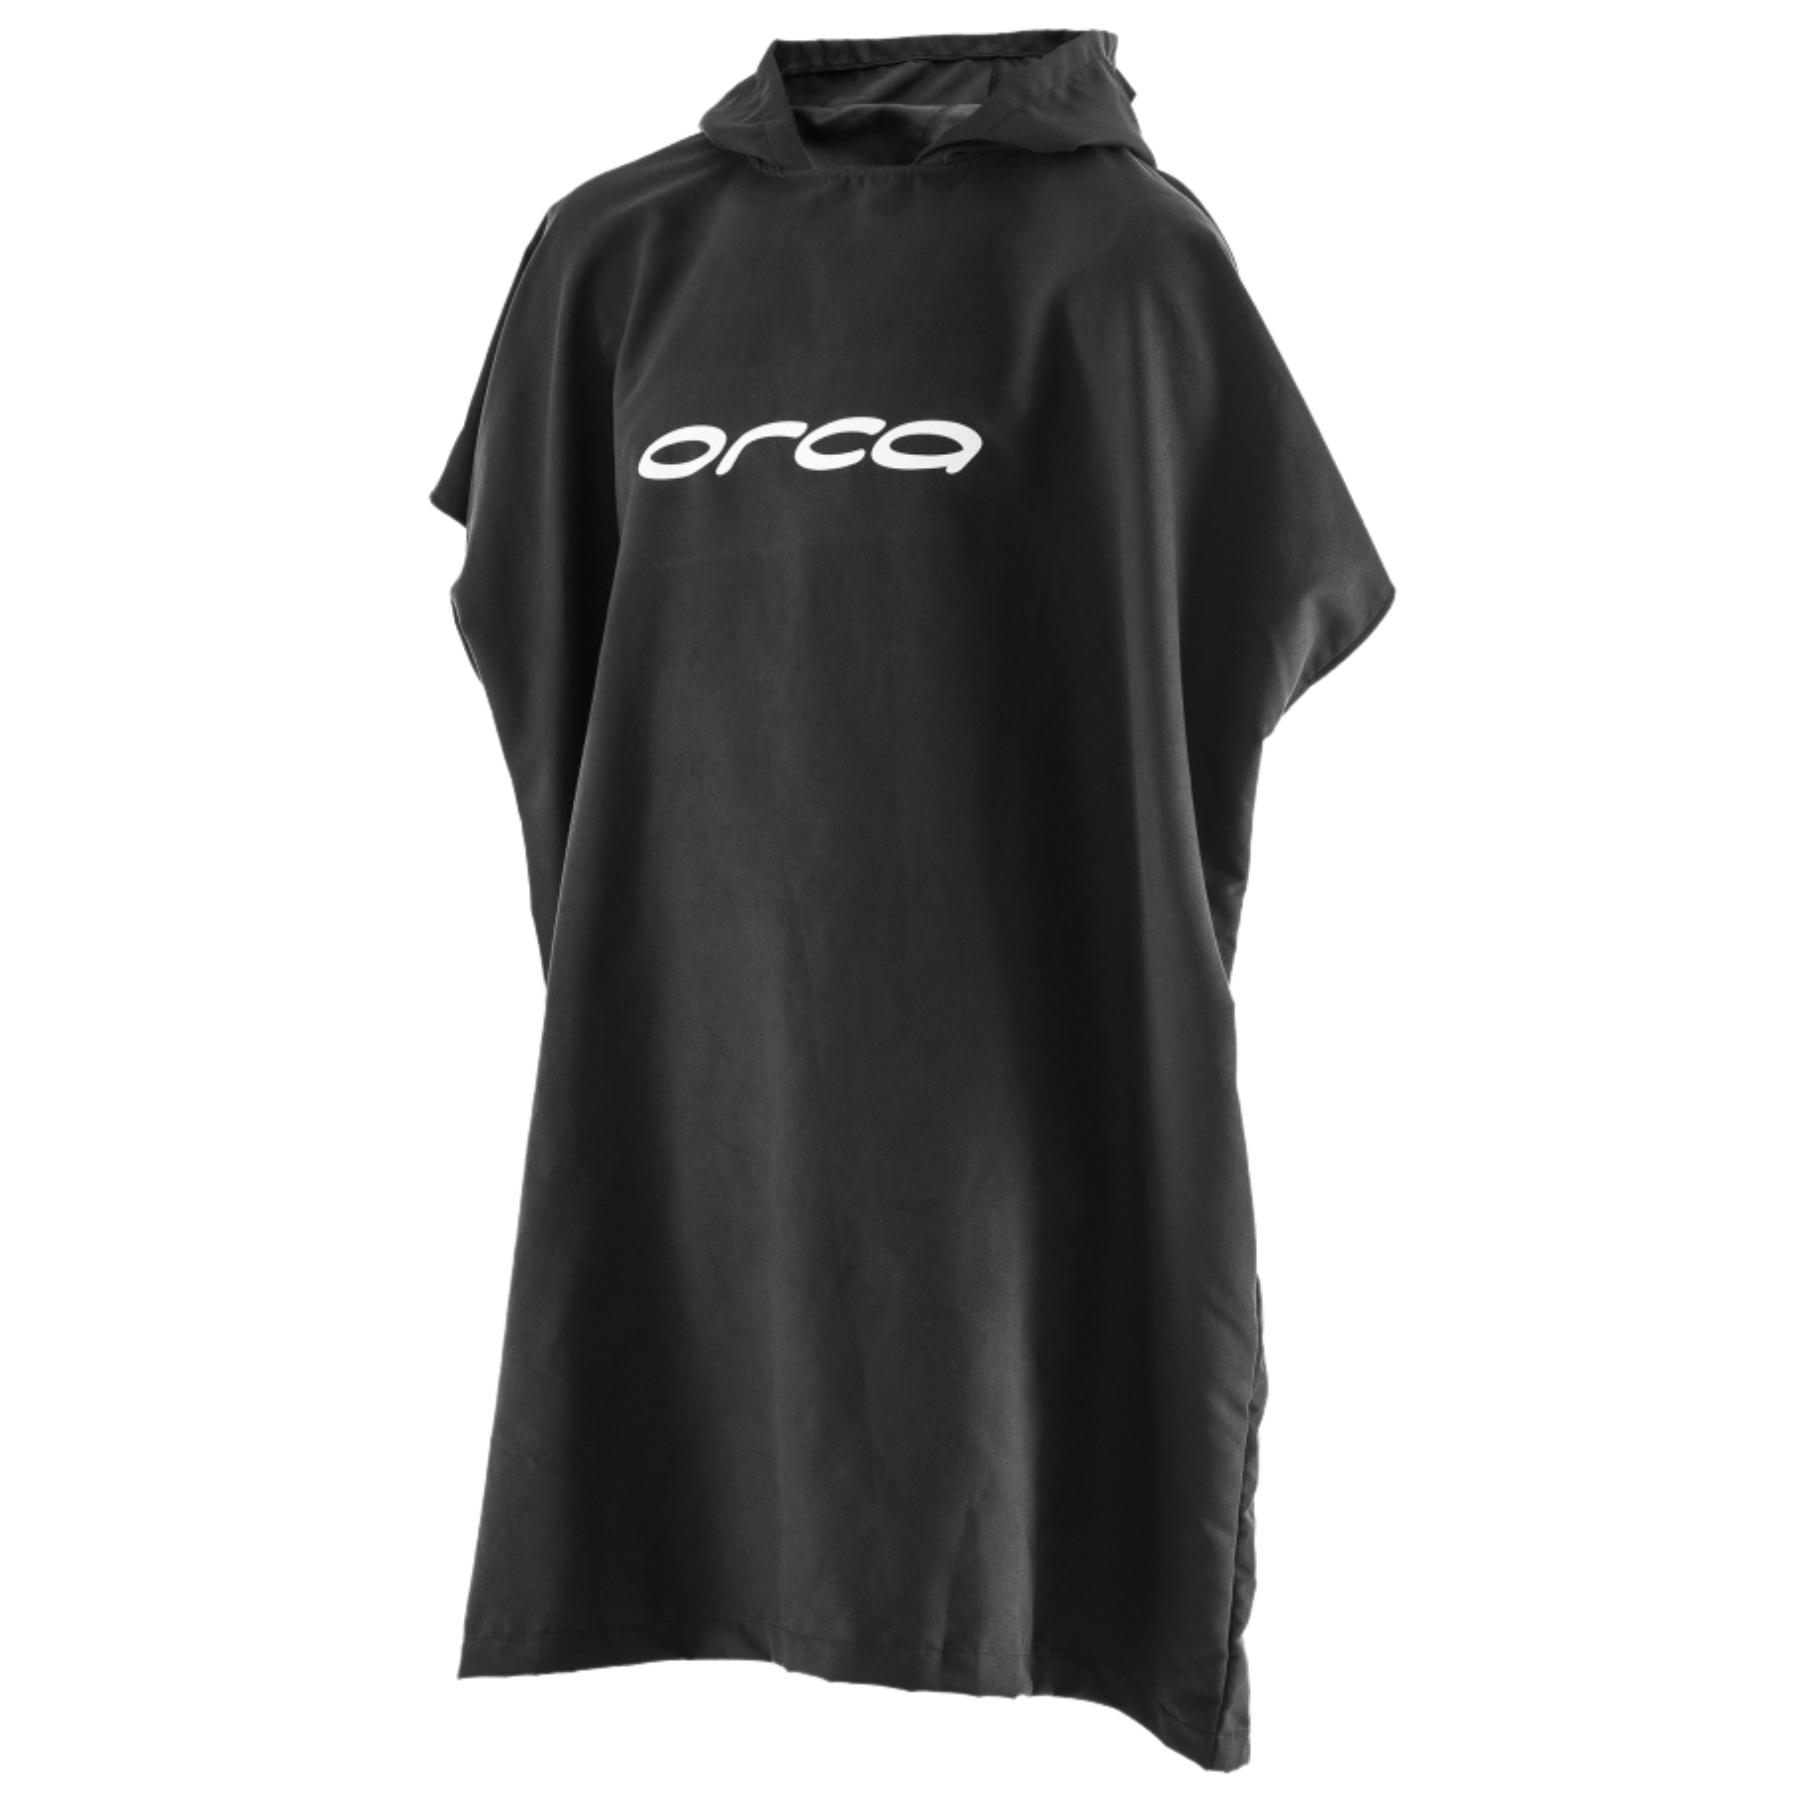 orca Wetsuit Accessory Poncho Towel JVBW0001